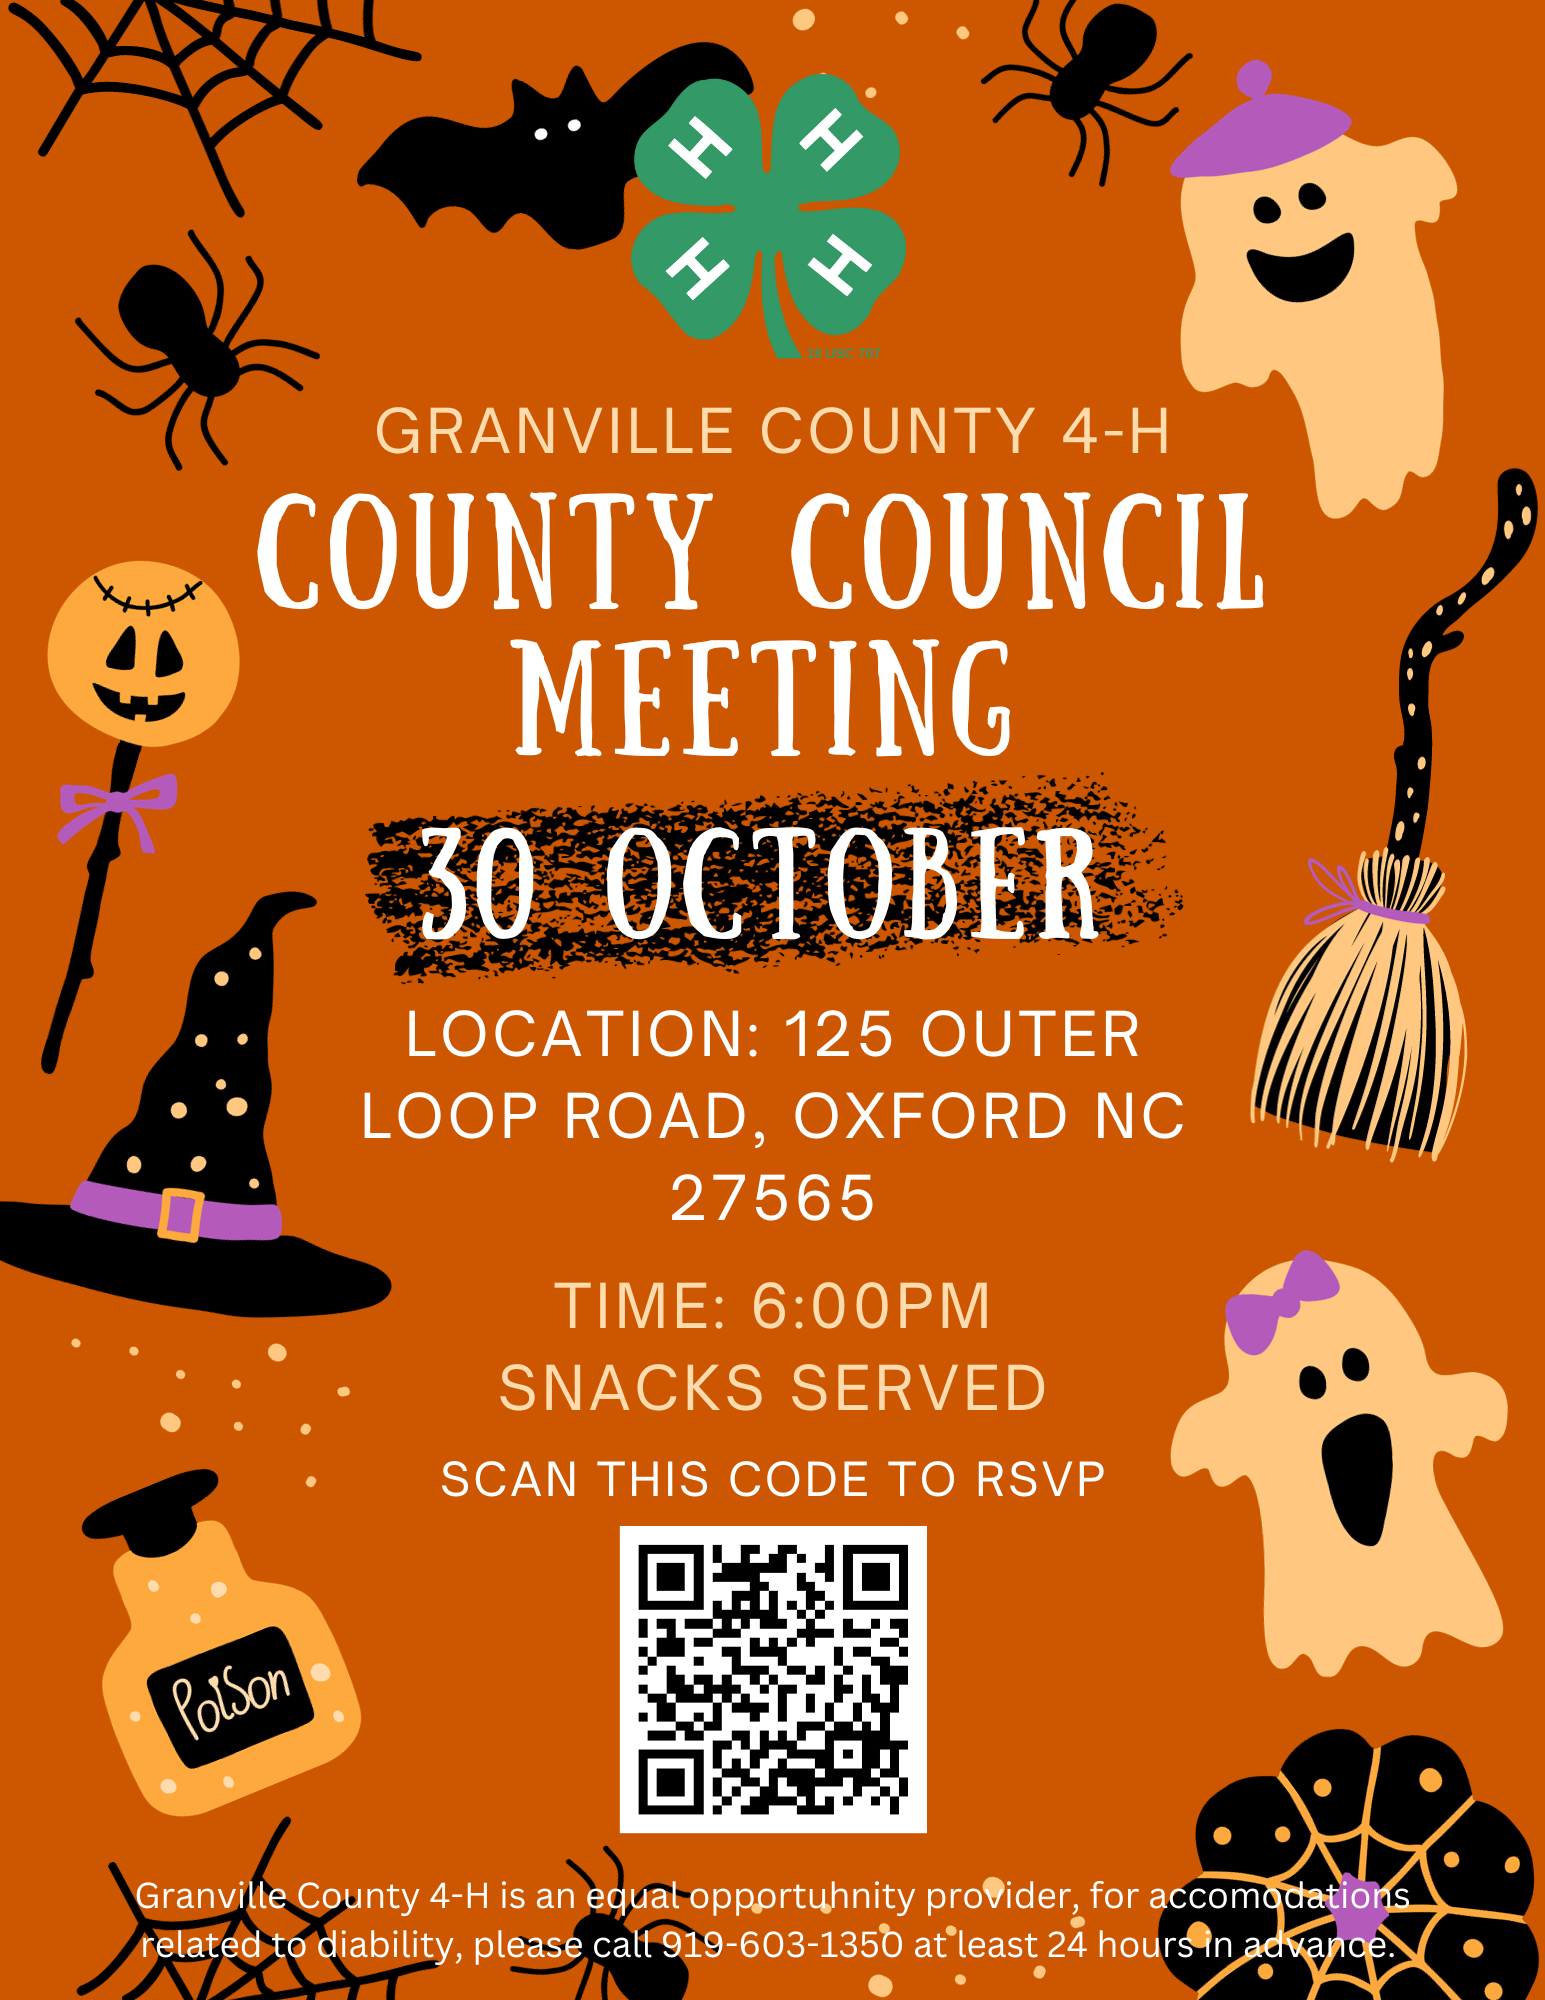 Granville County 4-H County Council Meeting, 30 October